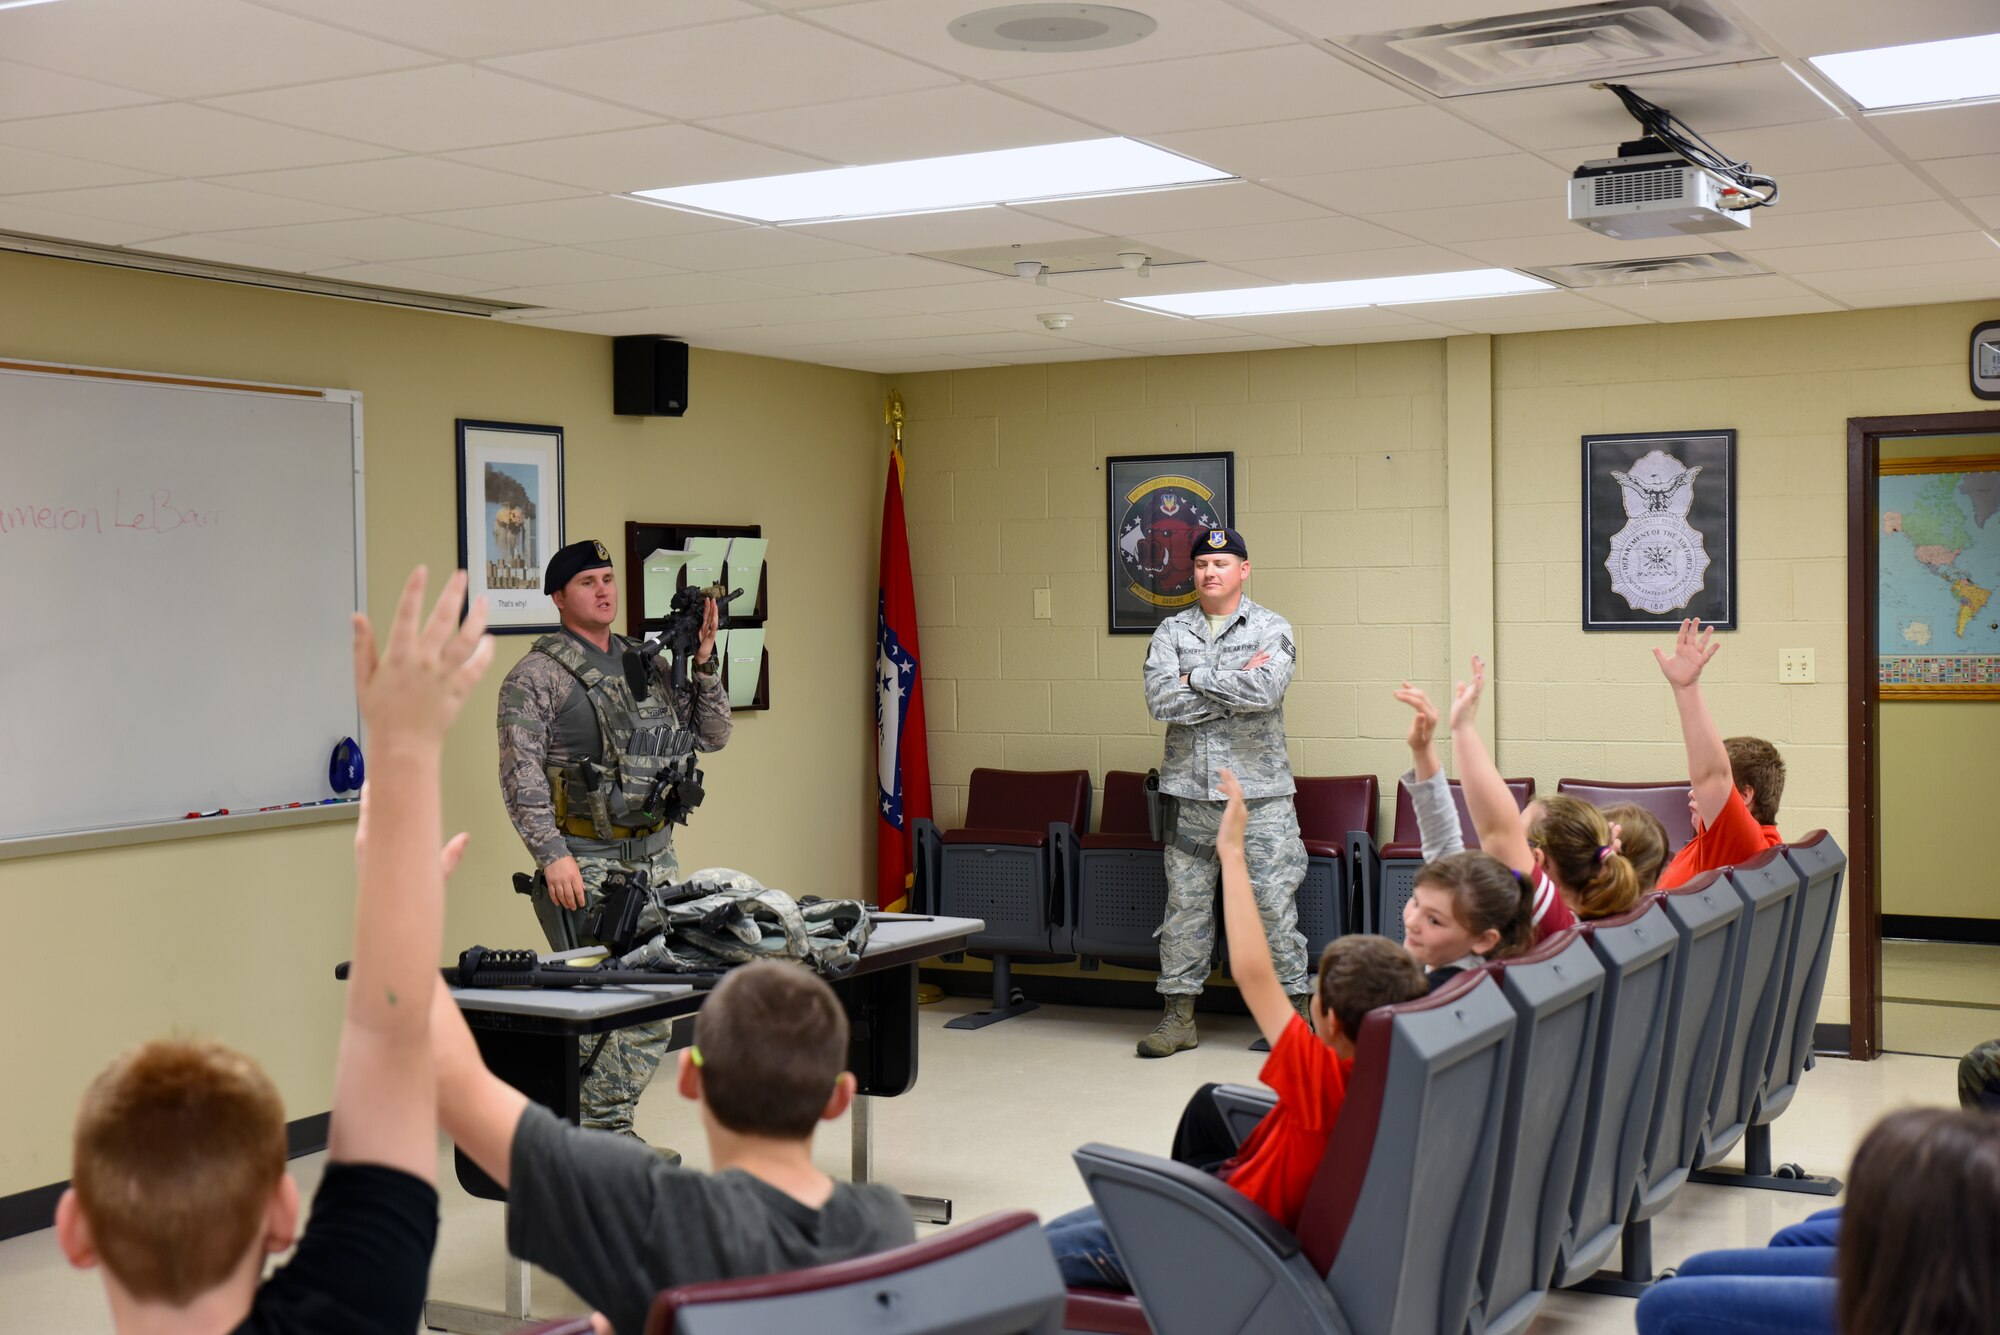 Staff Sgt. Cameron Lebarr, 188th Security Forces Squadron member, shows students from Mansfield Elementary School tools and weapons that the 188th SFS uses April 20, 2016, during their tour at Ebbing Air National Guard Base, Fort Smith, Ark. The students were shown careers in civil engineering, remotely piloted aircraft and security forces. (U.S. Air National Guard photo by Senior Airman Cody Martin/Released)